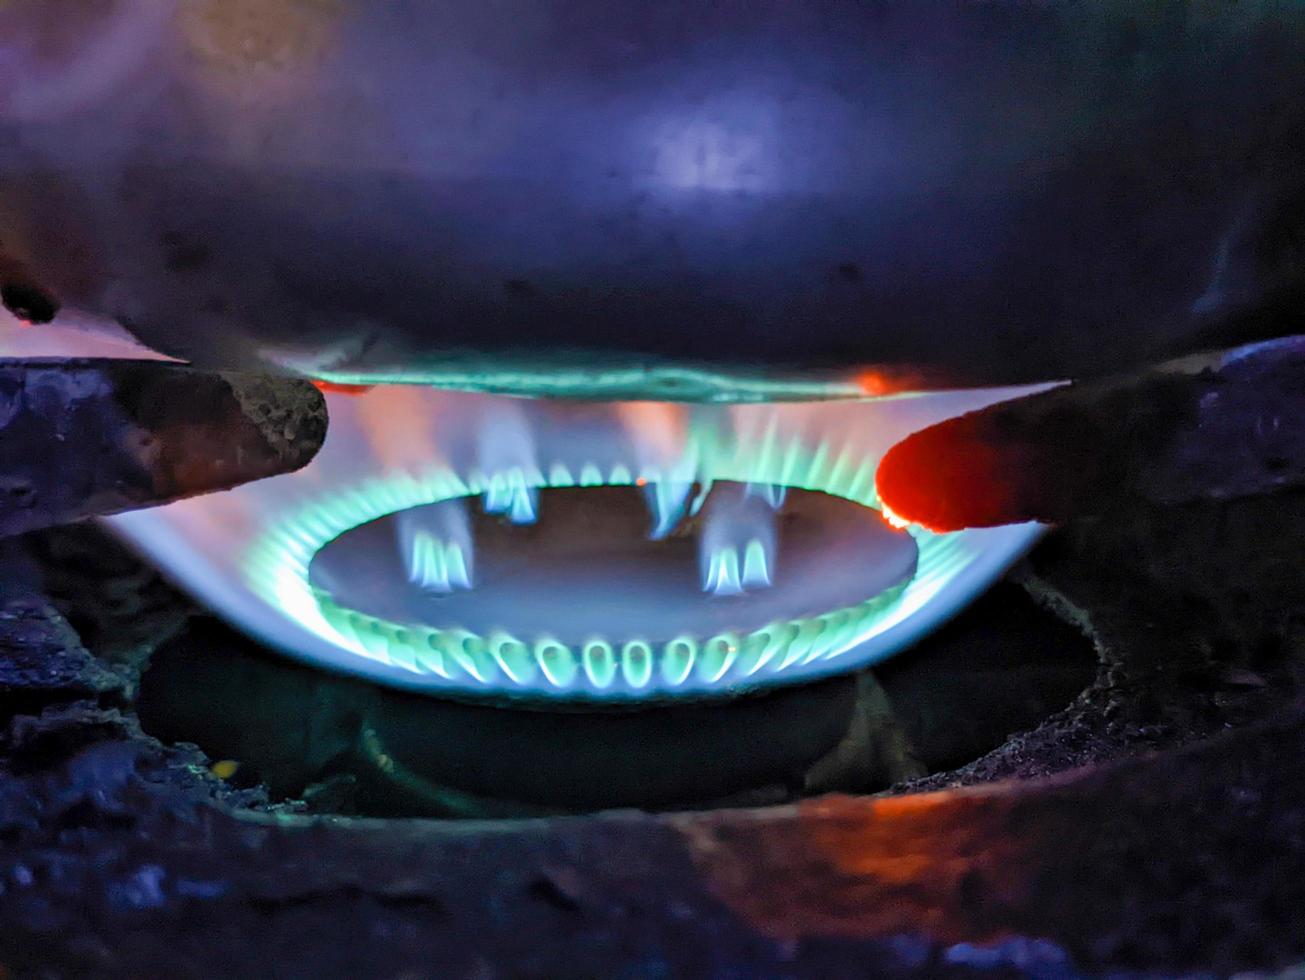 A close up of blue flame from the stove photo